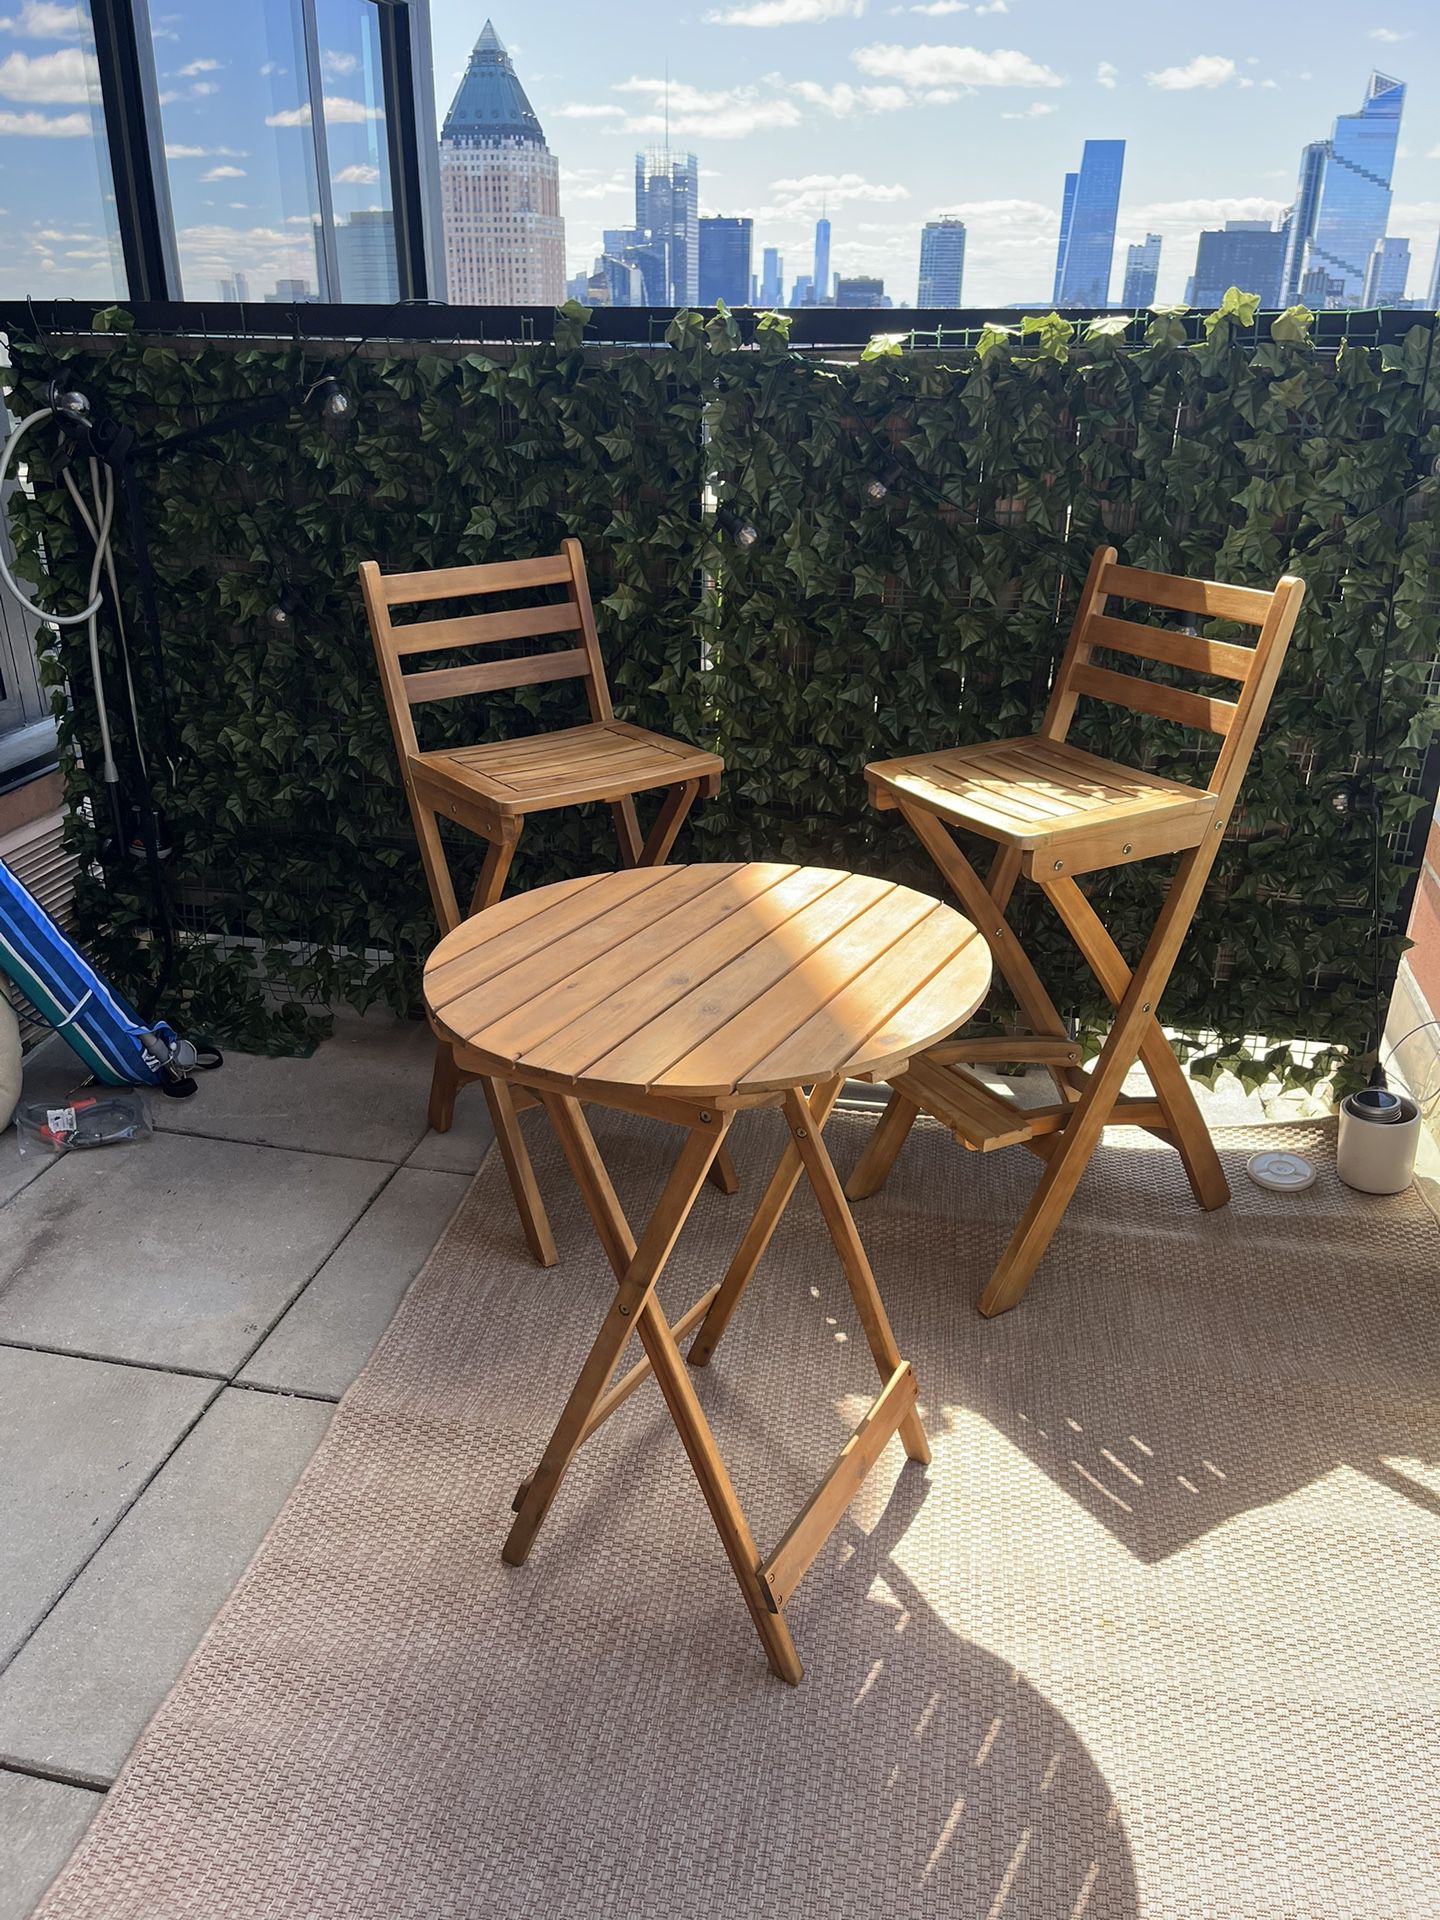 NEW Patio Set - High chairs and Table (Real wood)